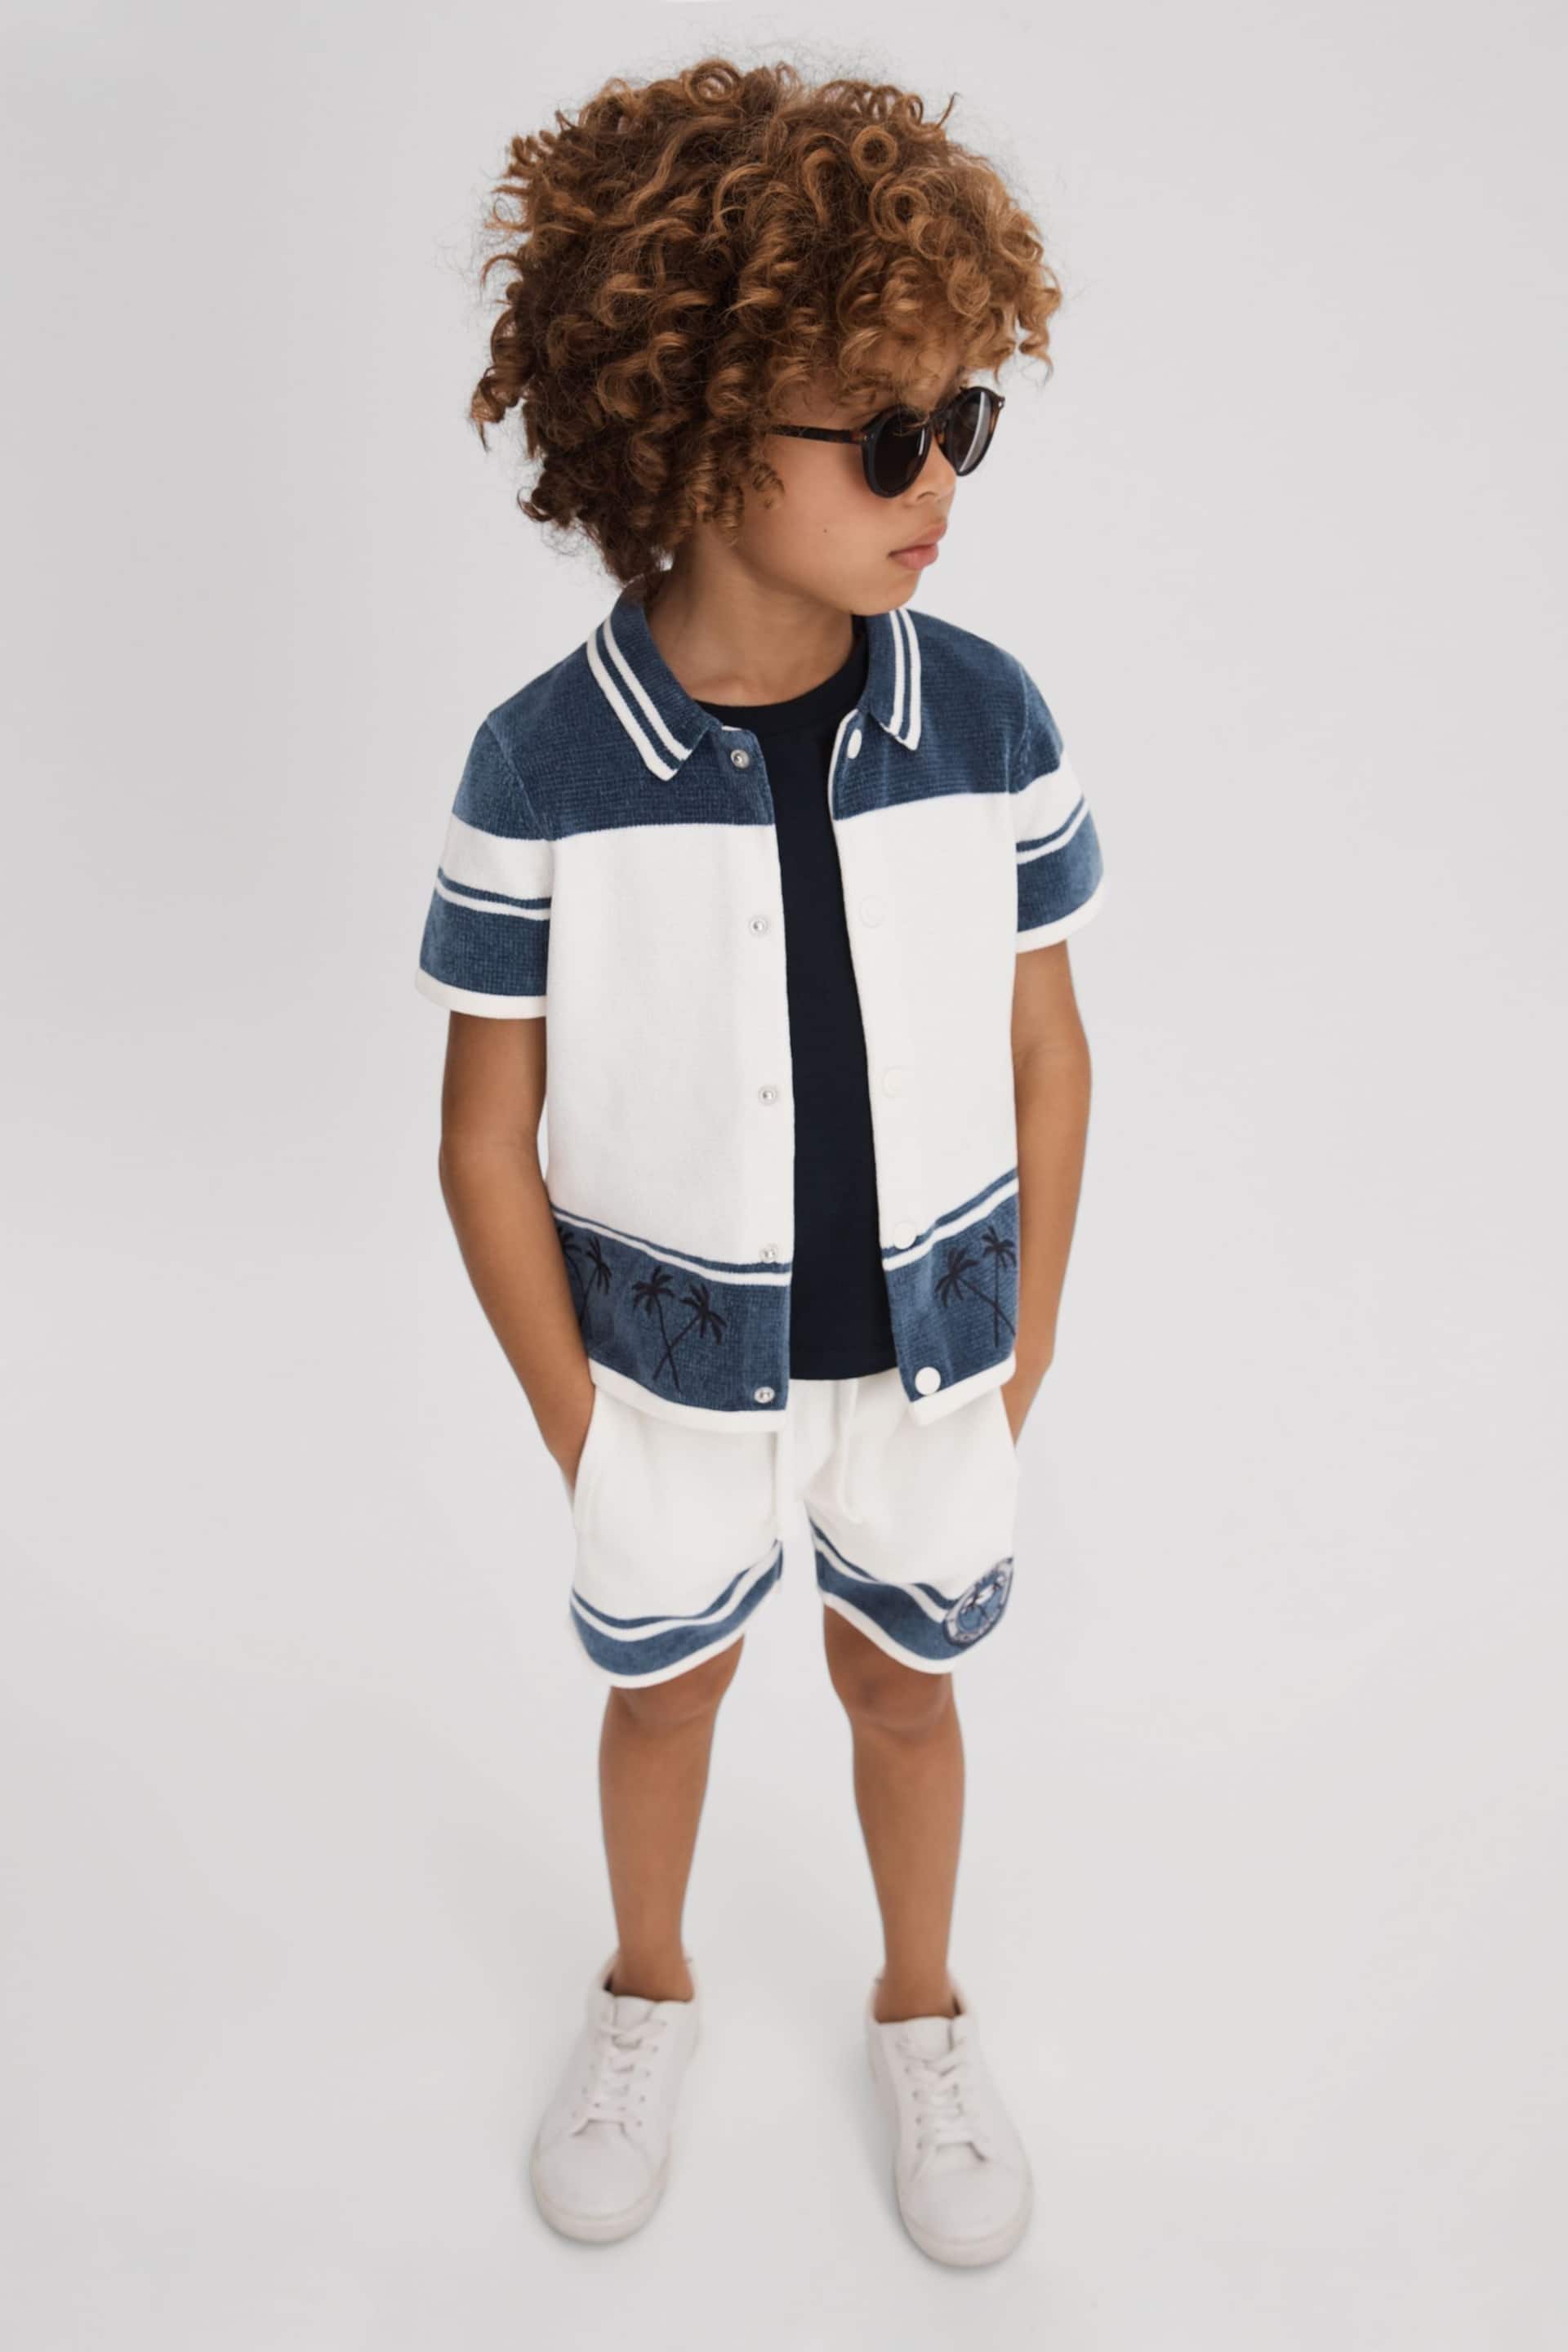 Reiss Optic White/Airforce Blue Bowler Junior Velour Embroidered Striped Shirt - Image 1 of 4